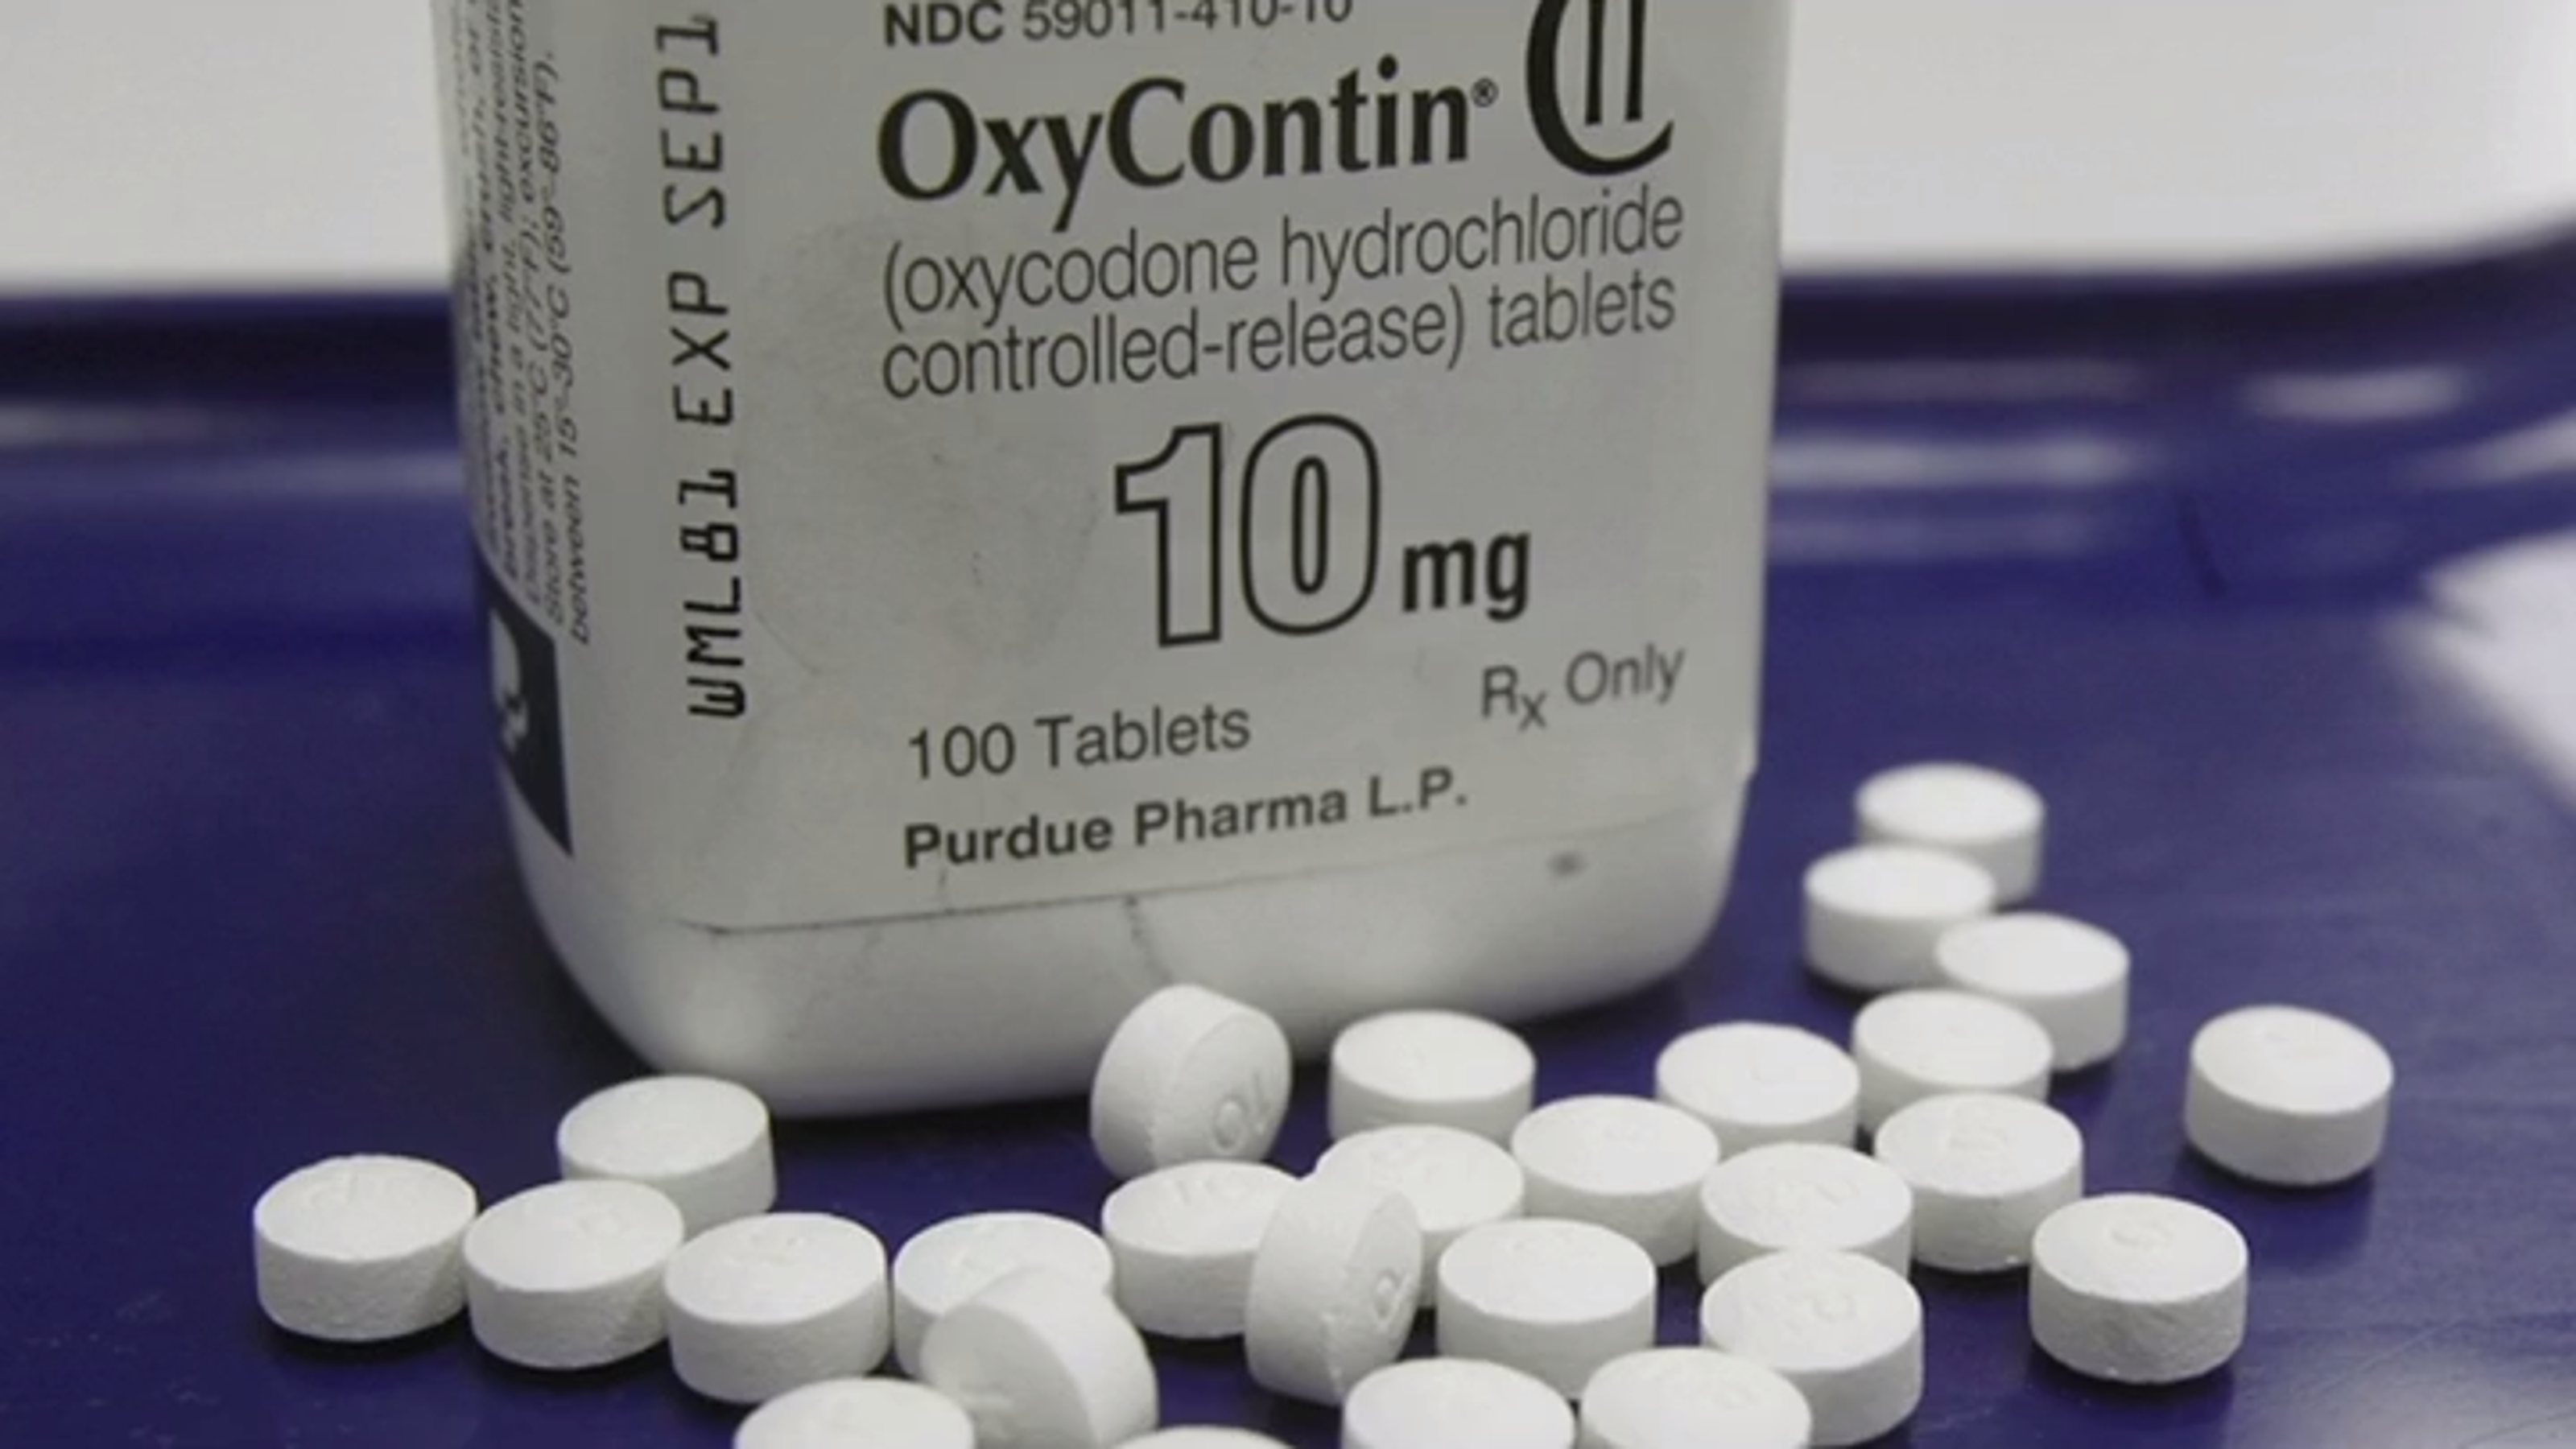 oxycontin-maker-purdue-pharma-files-for-bankruptcy